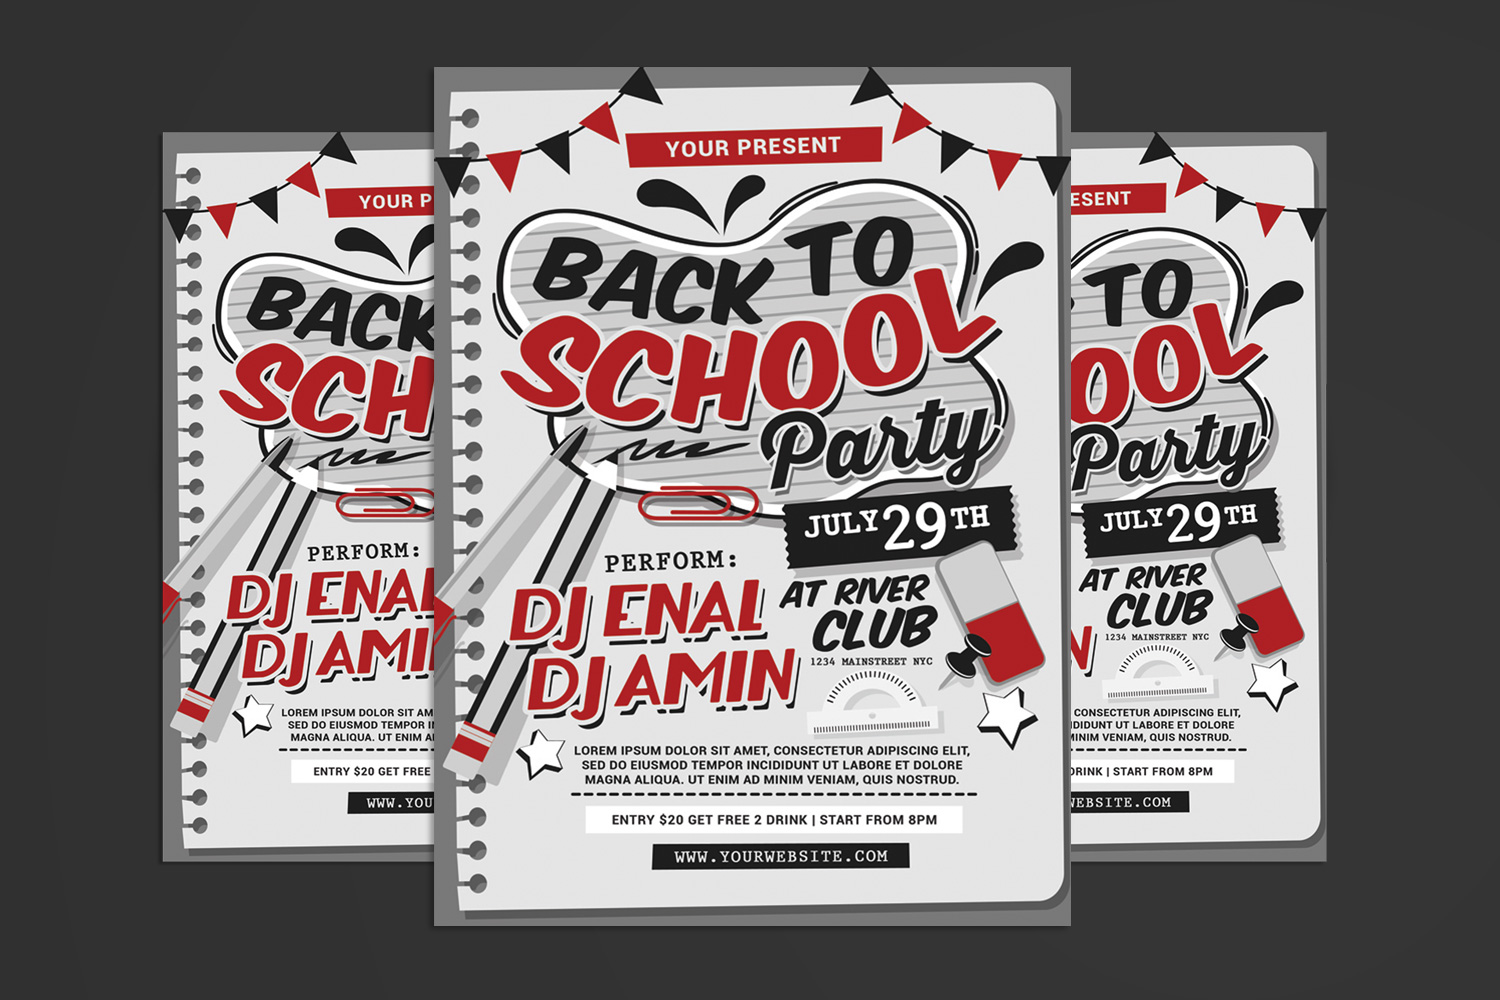 Back to School Party Flyer - Corporate Identity Template